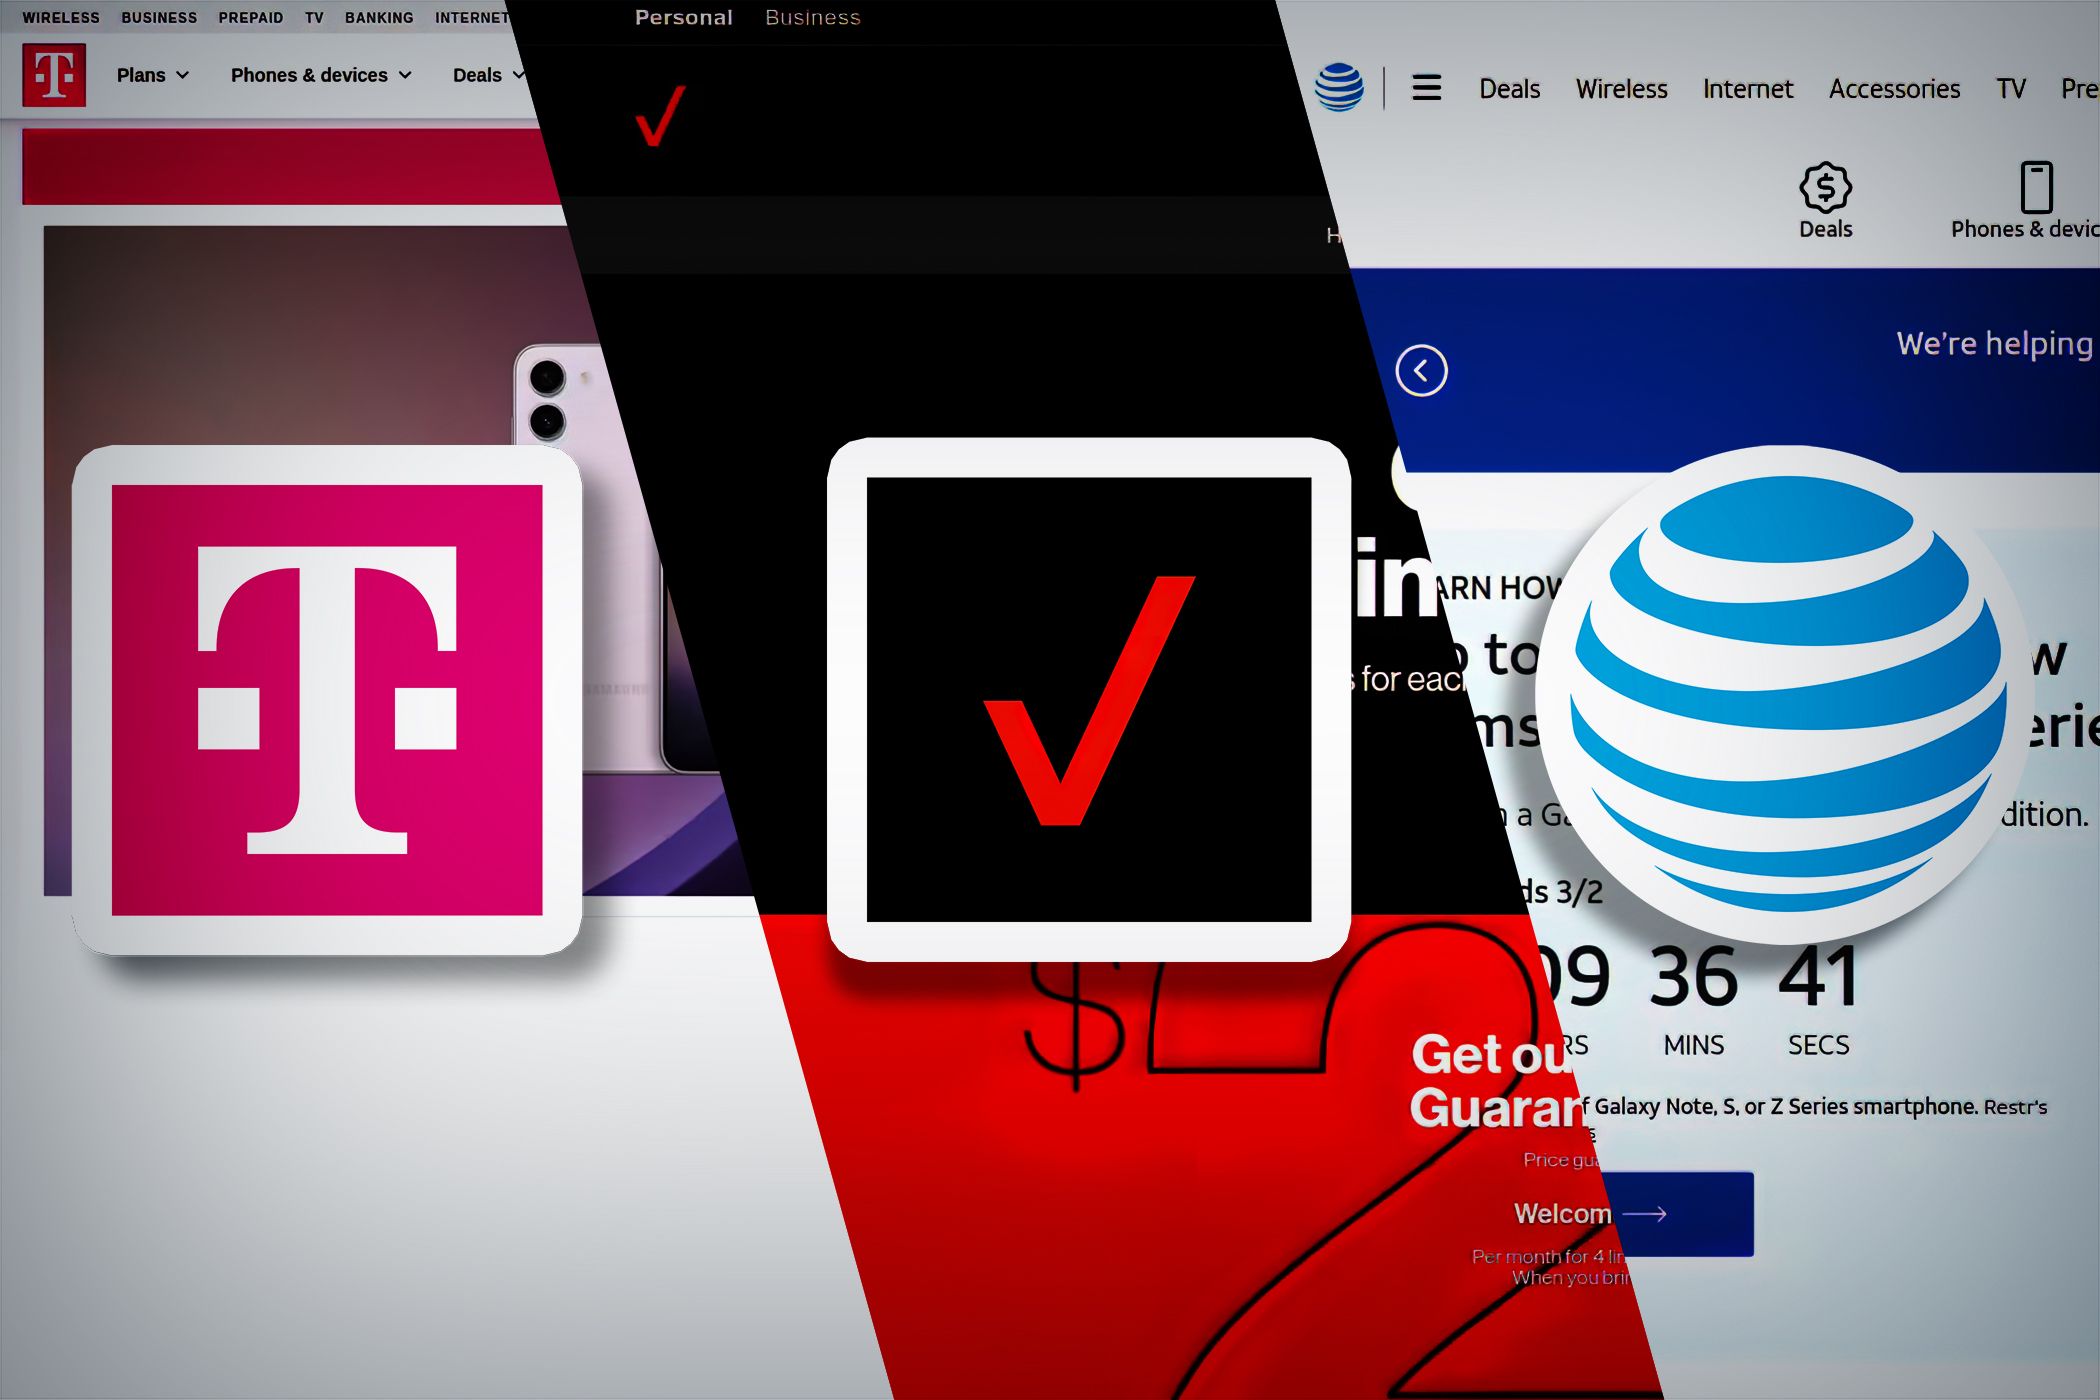 Verizon, AT&T, and T-Mobile and their home pages on the background